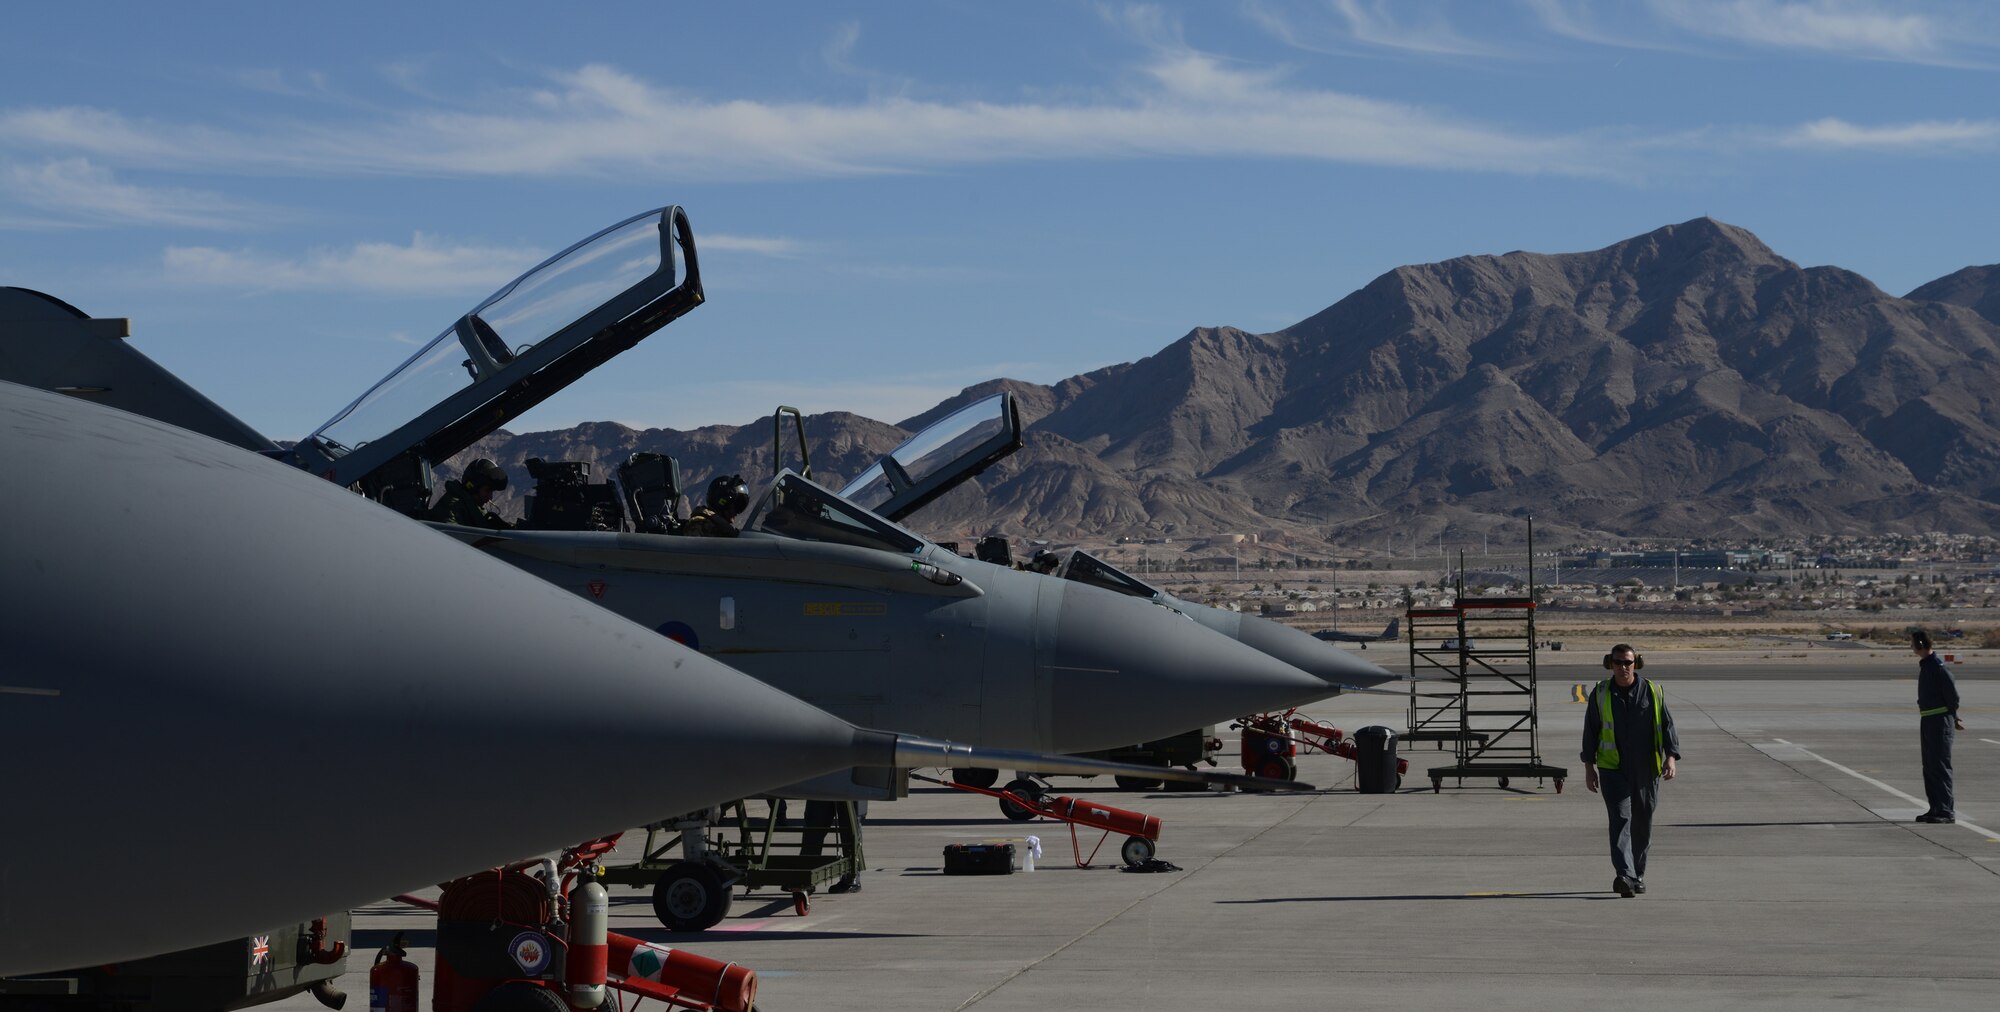 A British Royal Air Force maintainer surveys parked Tornado GR4s on the runway after their arrival at Nellis Air Force Base, Nev., Jan. 22, 2013. The IX (B) Squadron whose motto is, "Per noctum volamus - Throughout the night we fly," traces their heritage from World War I to Operation Iraqi Freedom. (U.S. Air Force photo by Senior Airman Benjamin Sutton/Released)